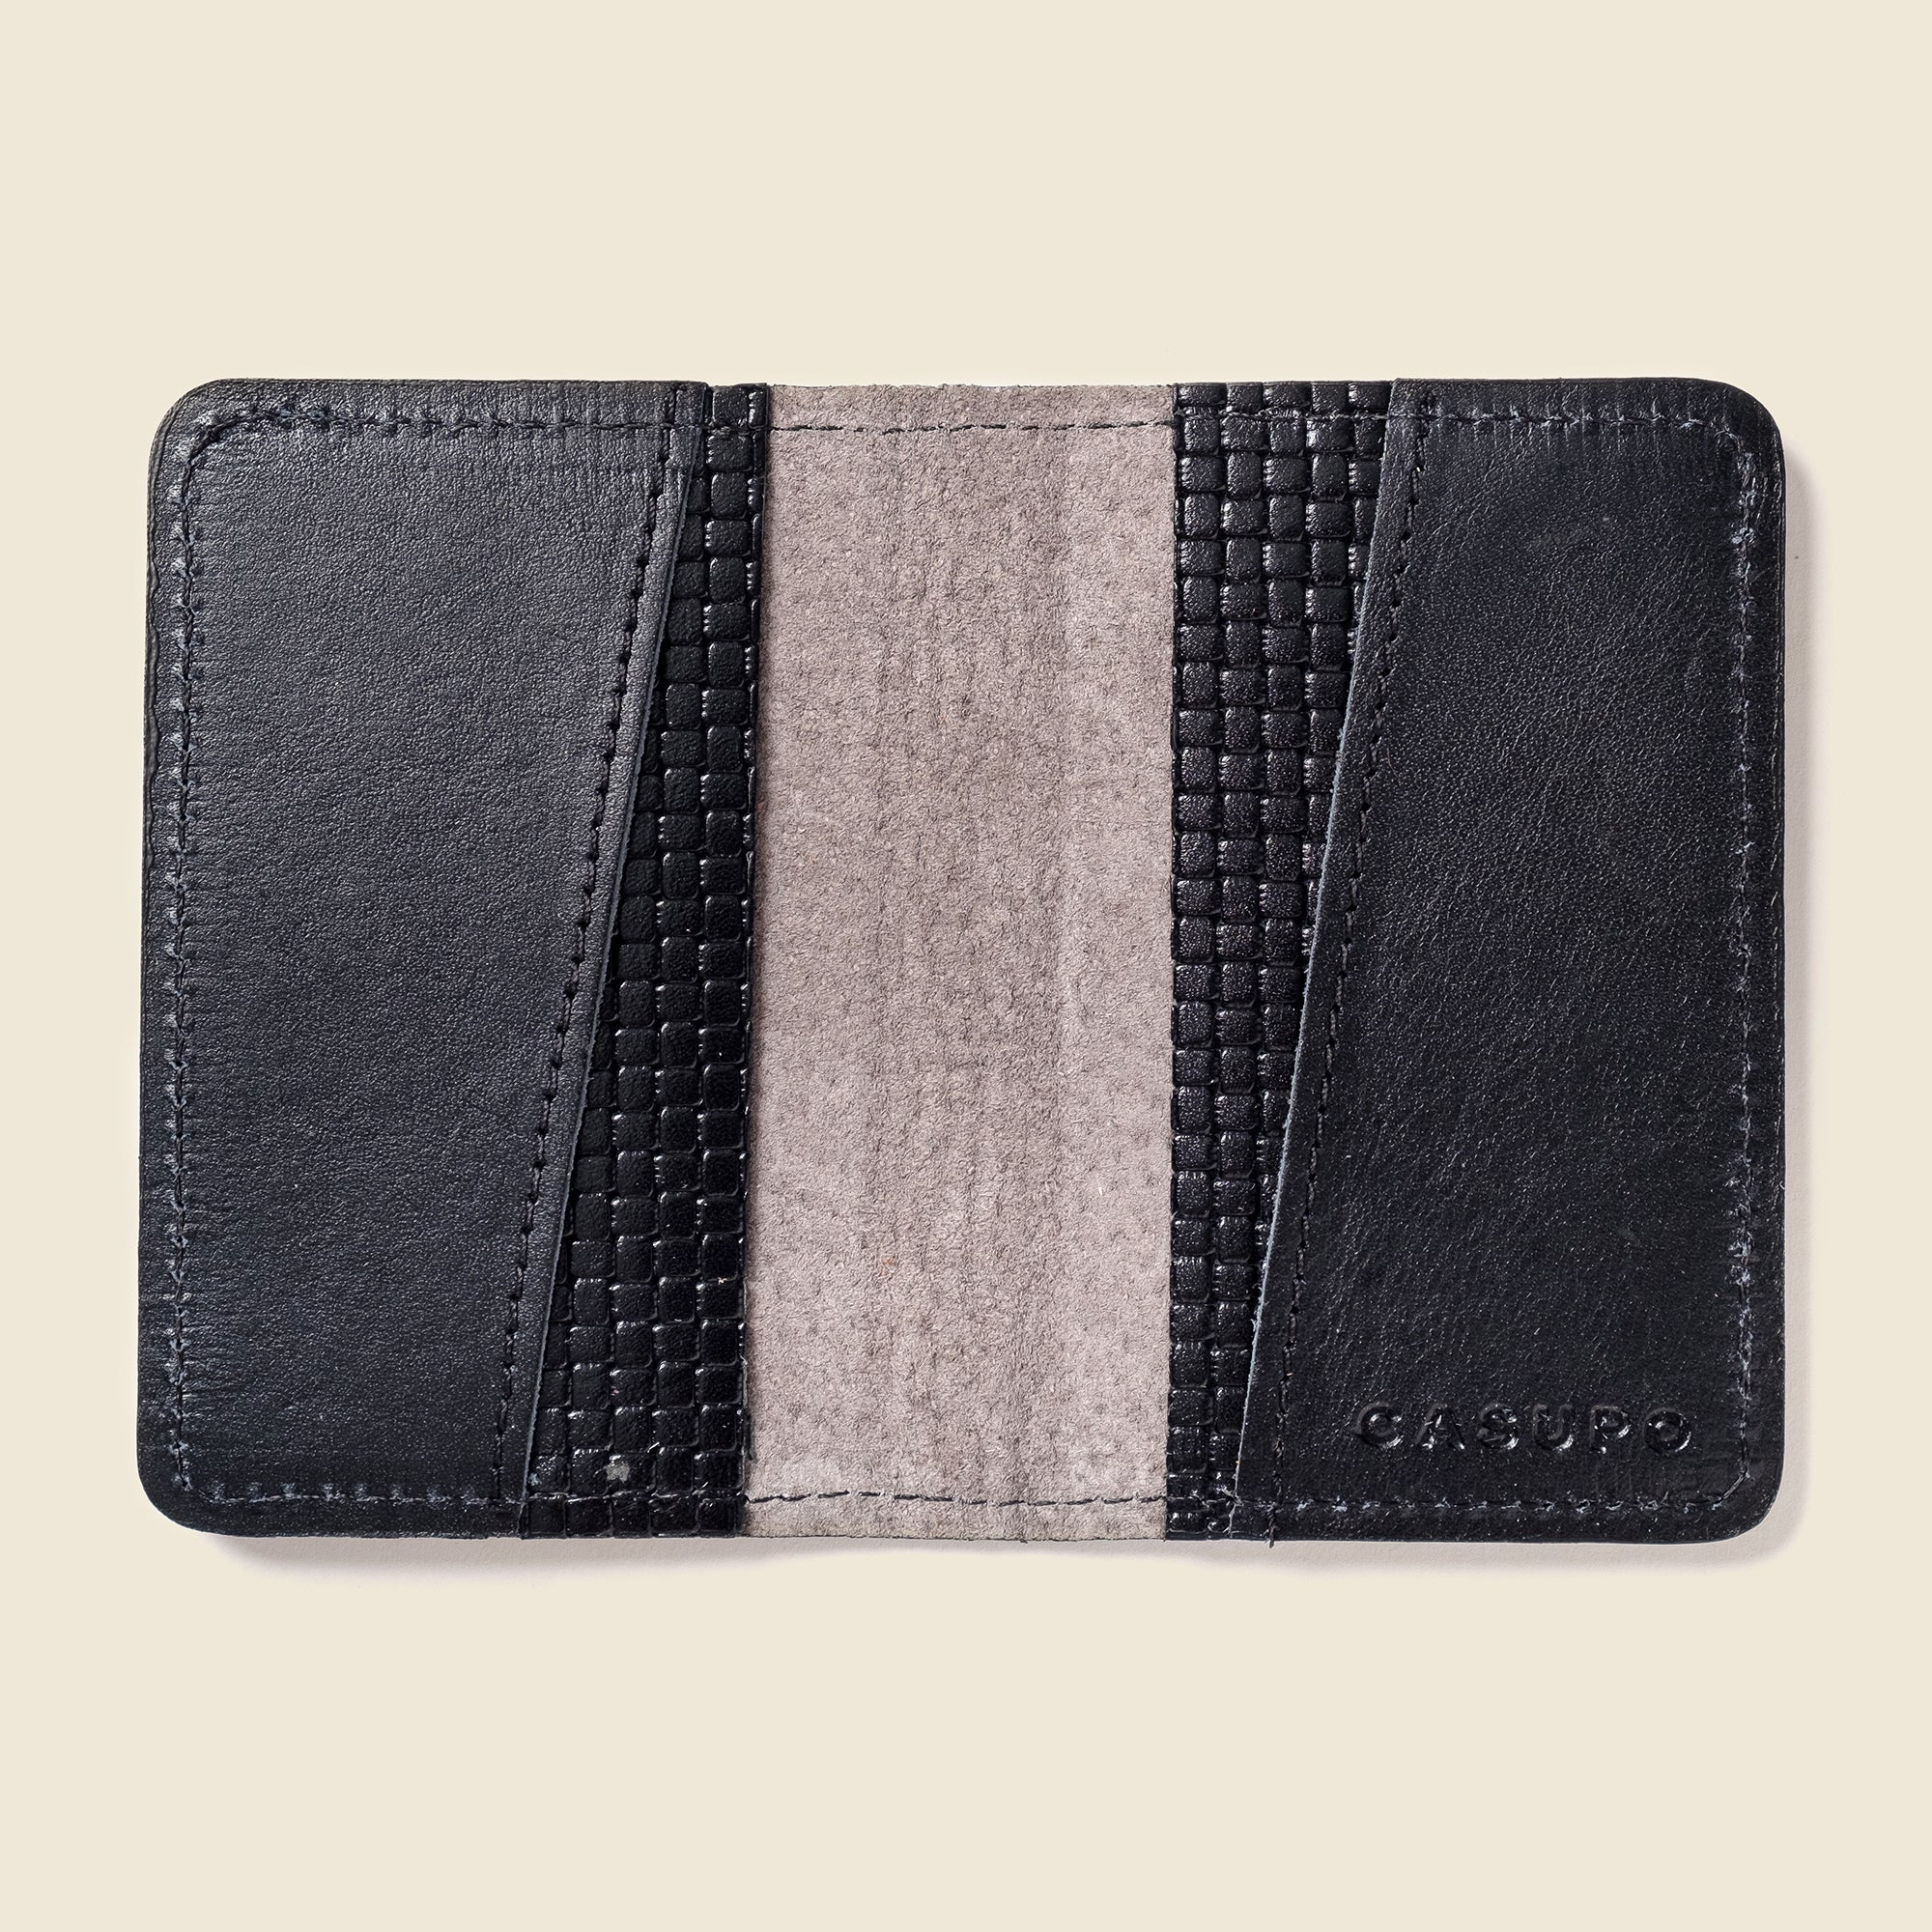 Black leather bifold wallet for dads